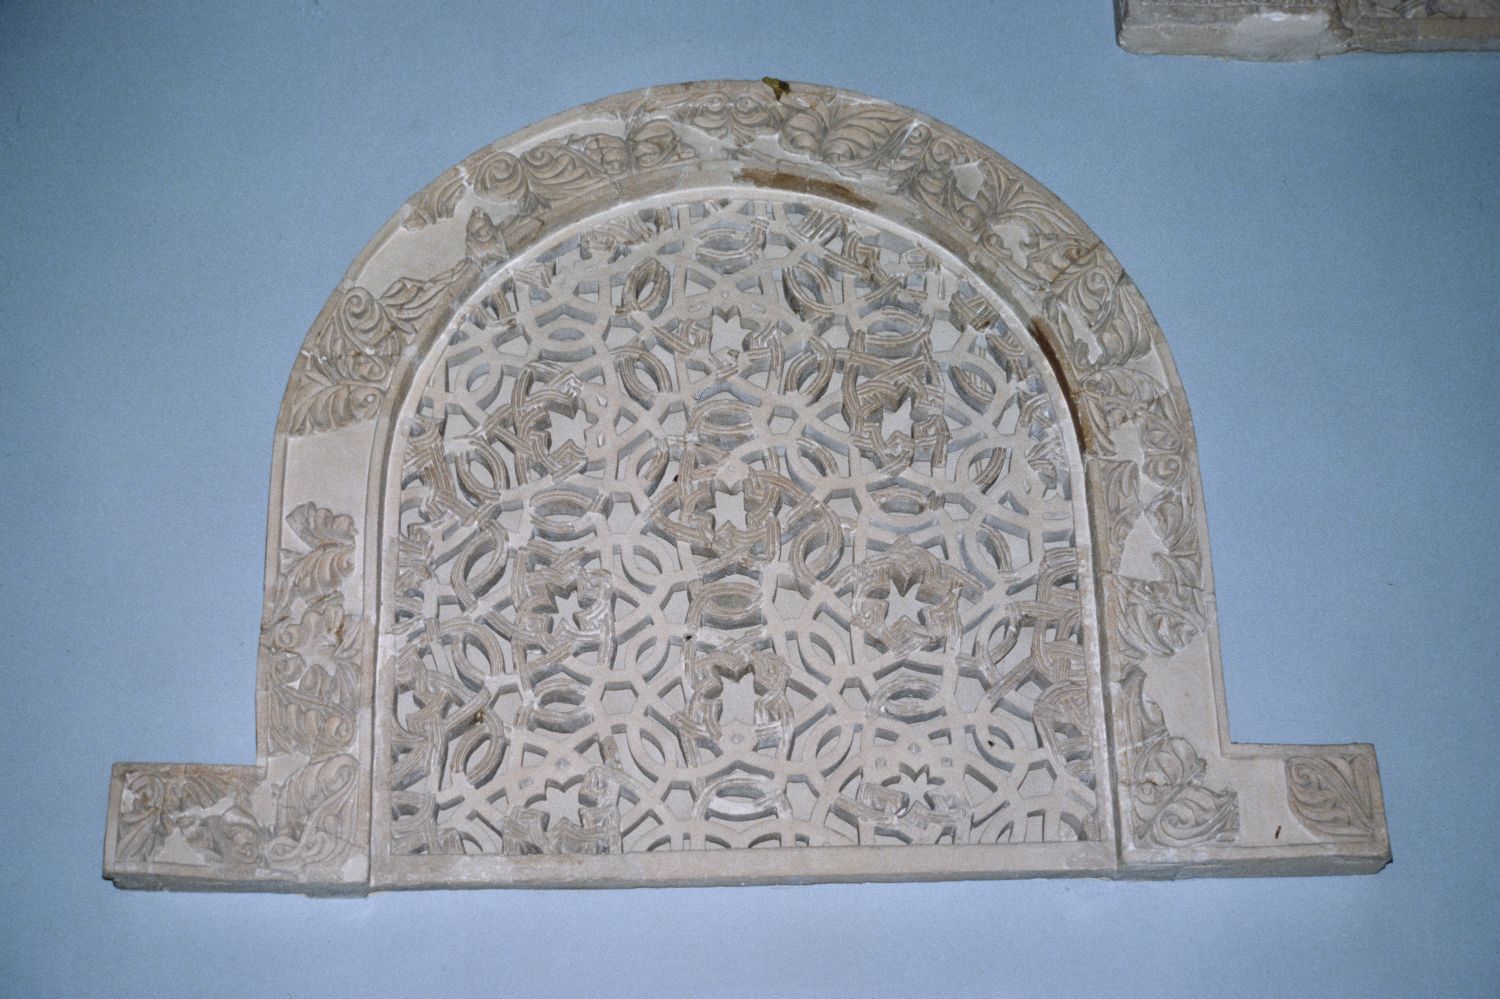 Reconstructed stucco window grill from Qasr al-Hayr al-Gharbi in the National Museum, Damascus.